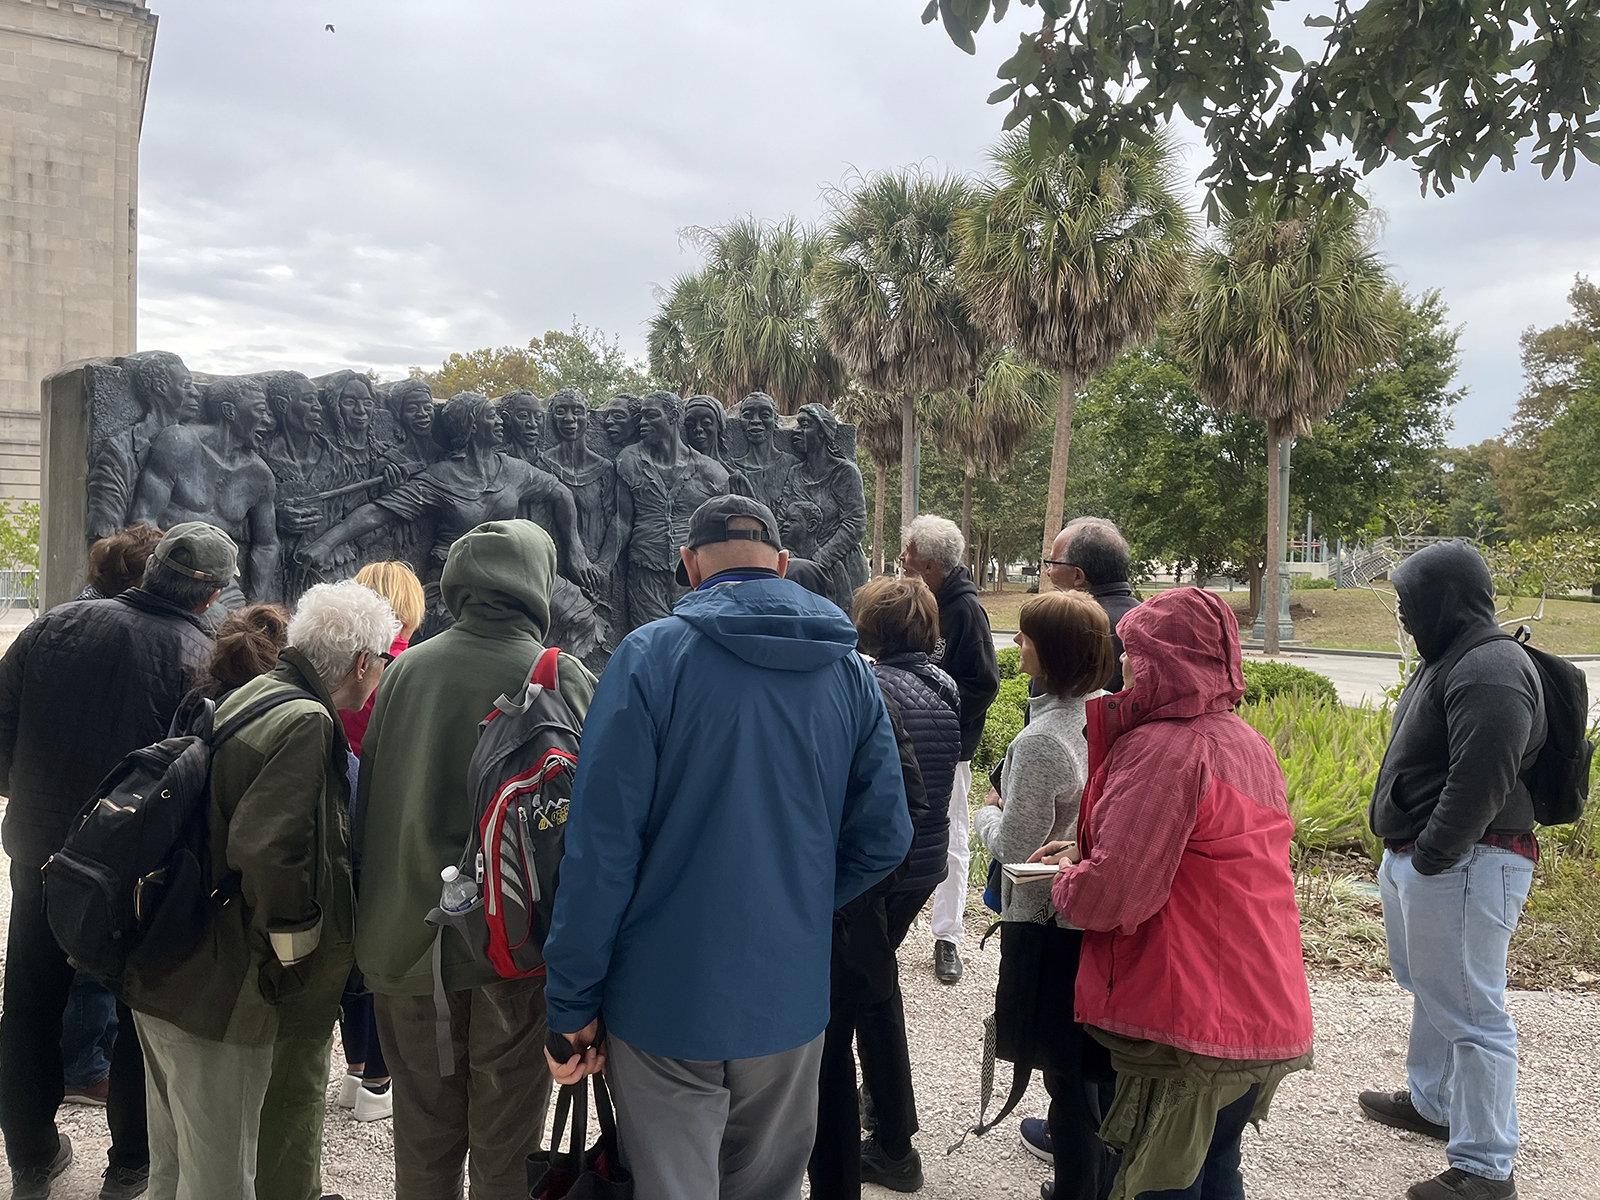 ReStory US tour participants visit the 2010 sculpture "Congo Square" by Adewale Adenle at Louis Armstrong Park in New Orleans, Louisiana. (RNS photo/Bob Smietana)